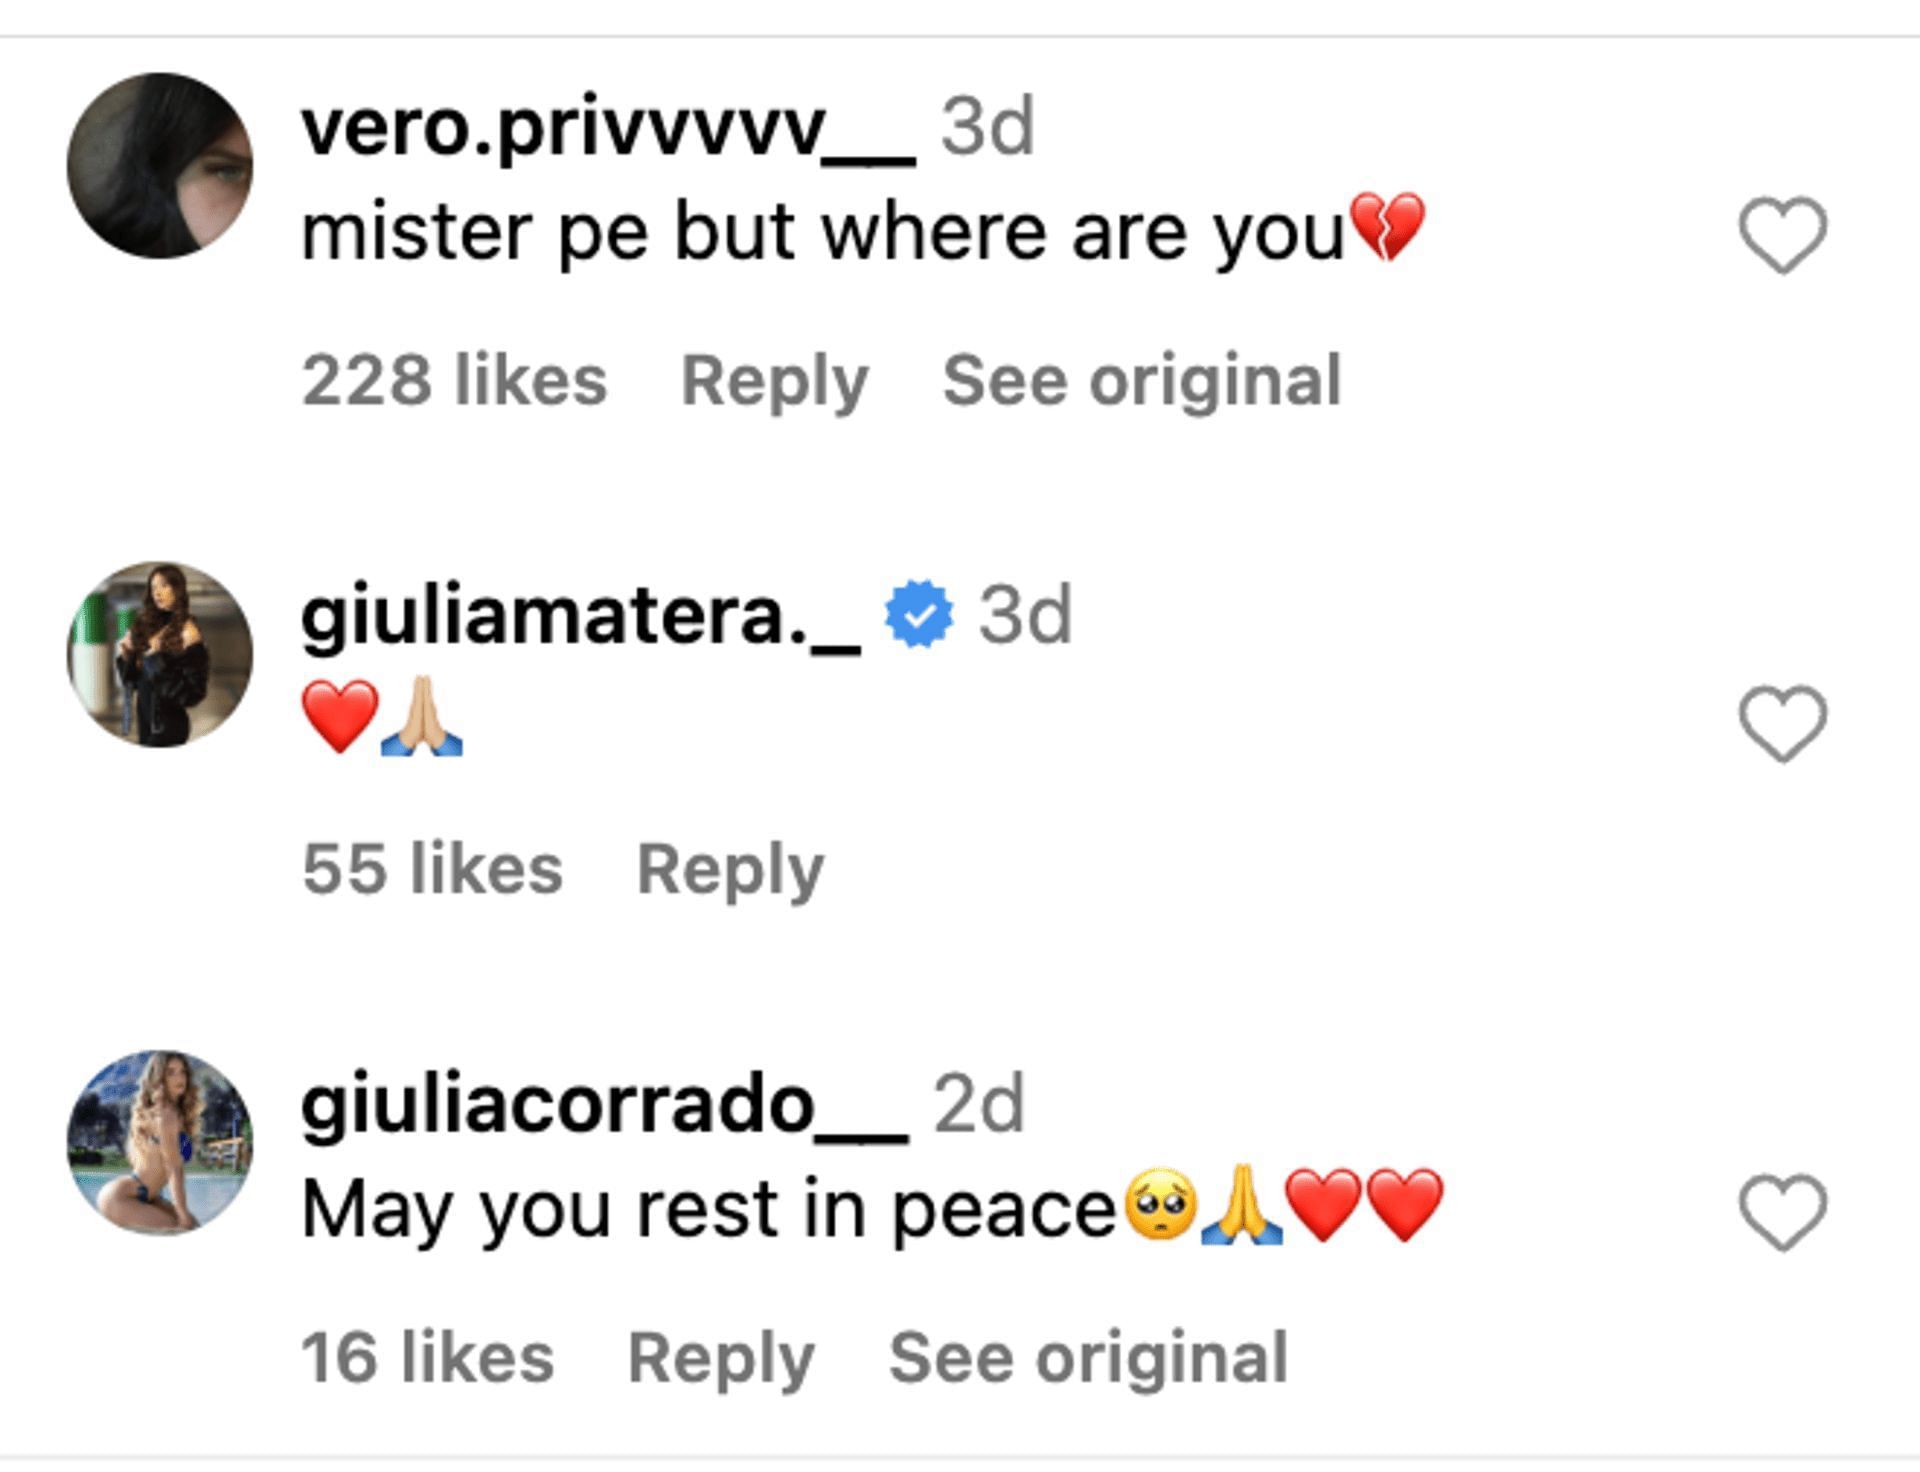 Social media users mourn the passing of the Italian influencer, who passed away at 40 due to cardiac arrest. (Image via Instagram)